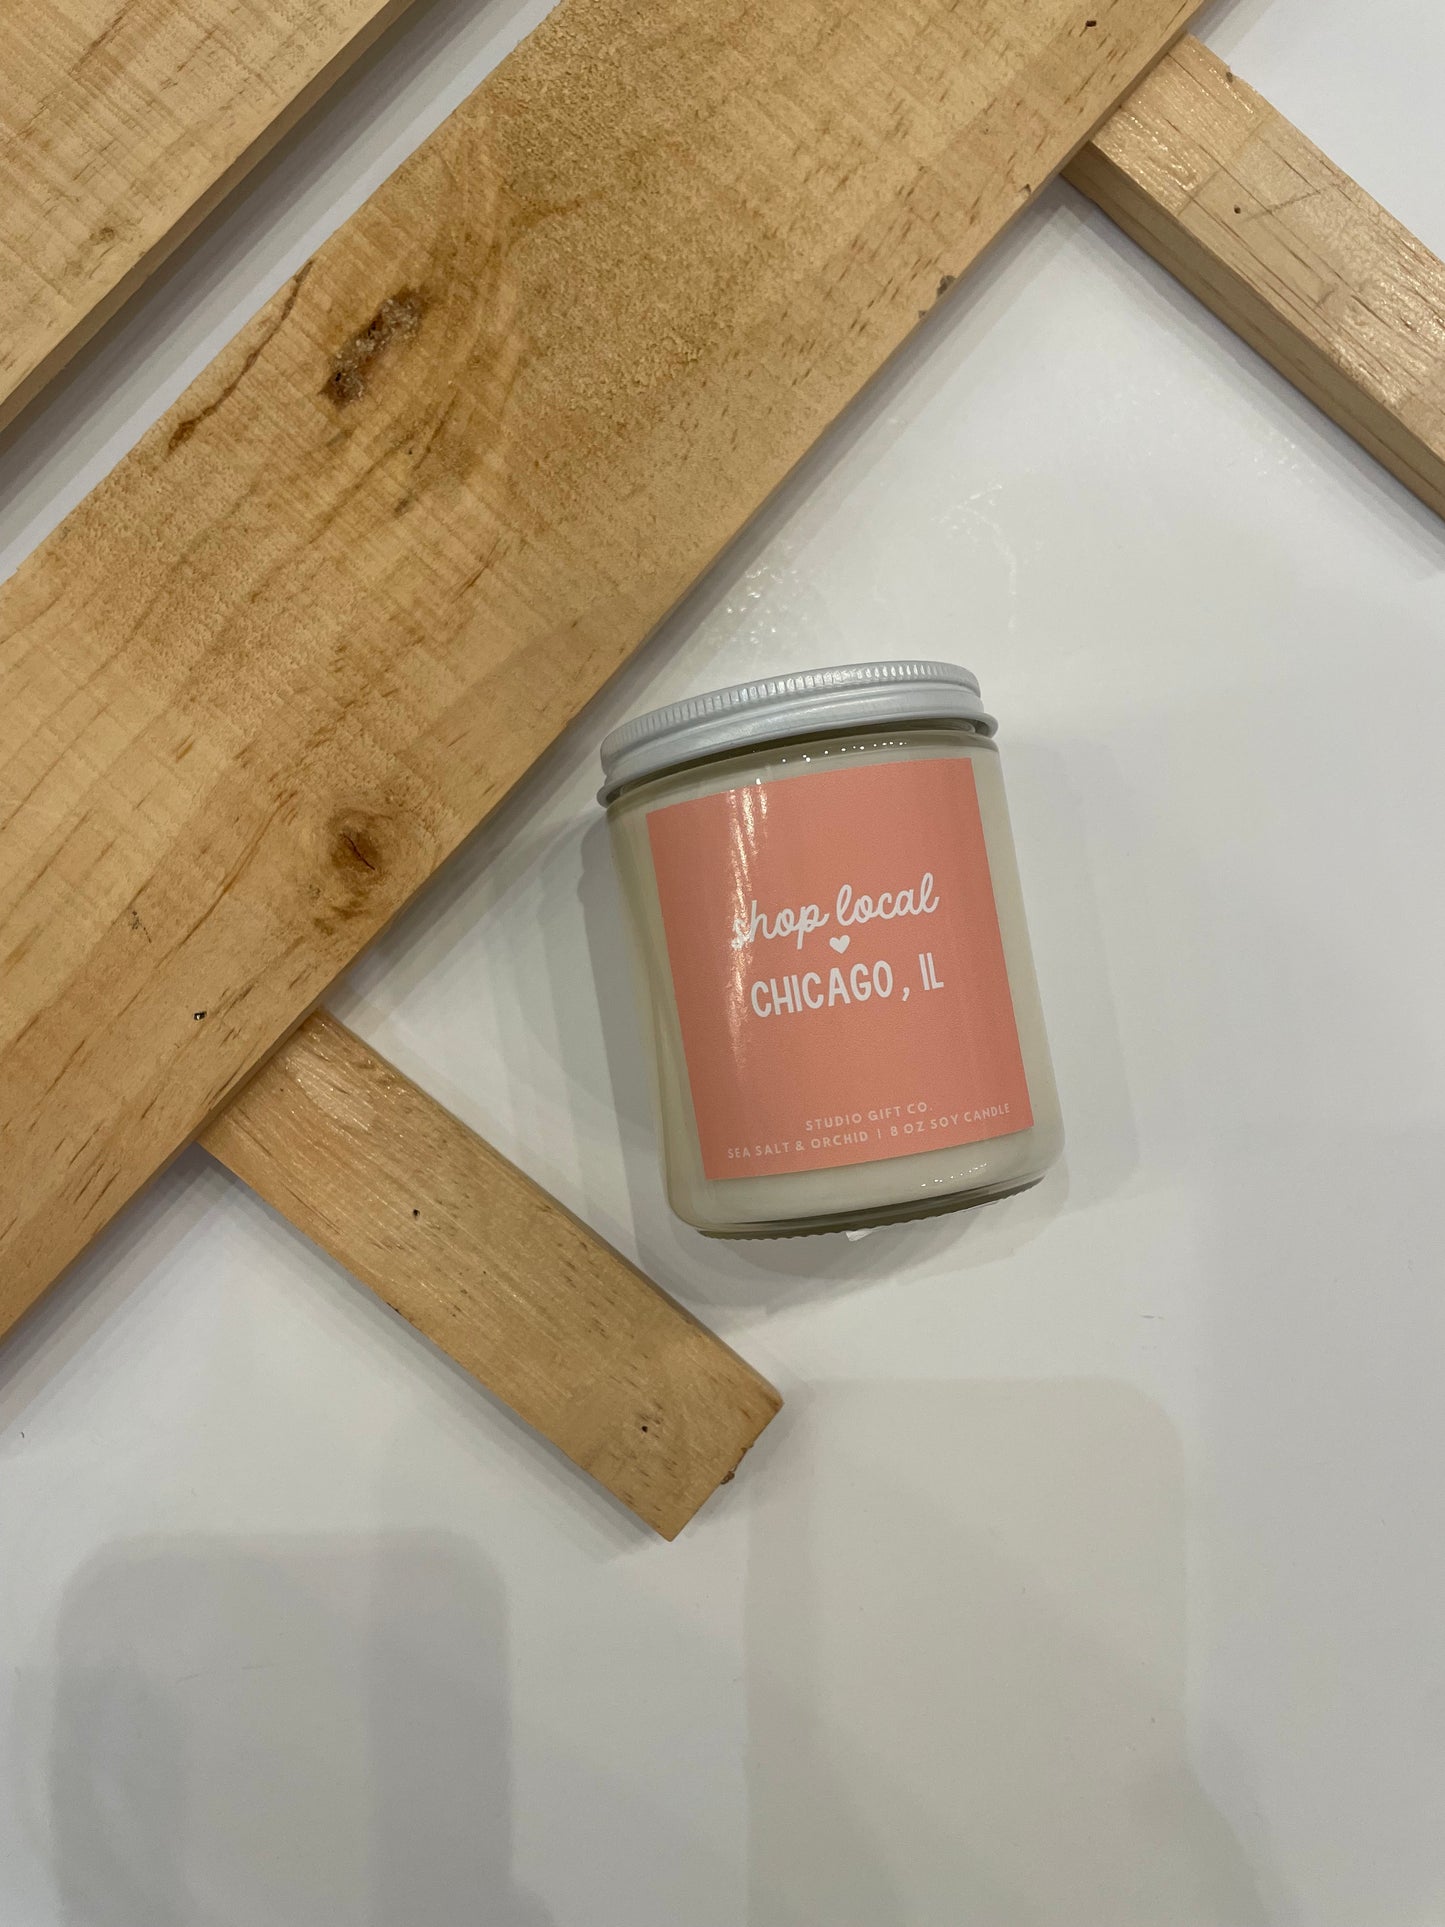 SHOP LOCAL CANDLE